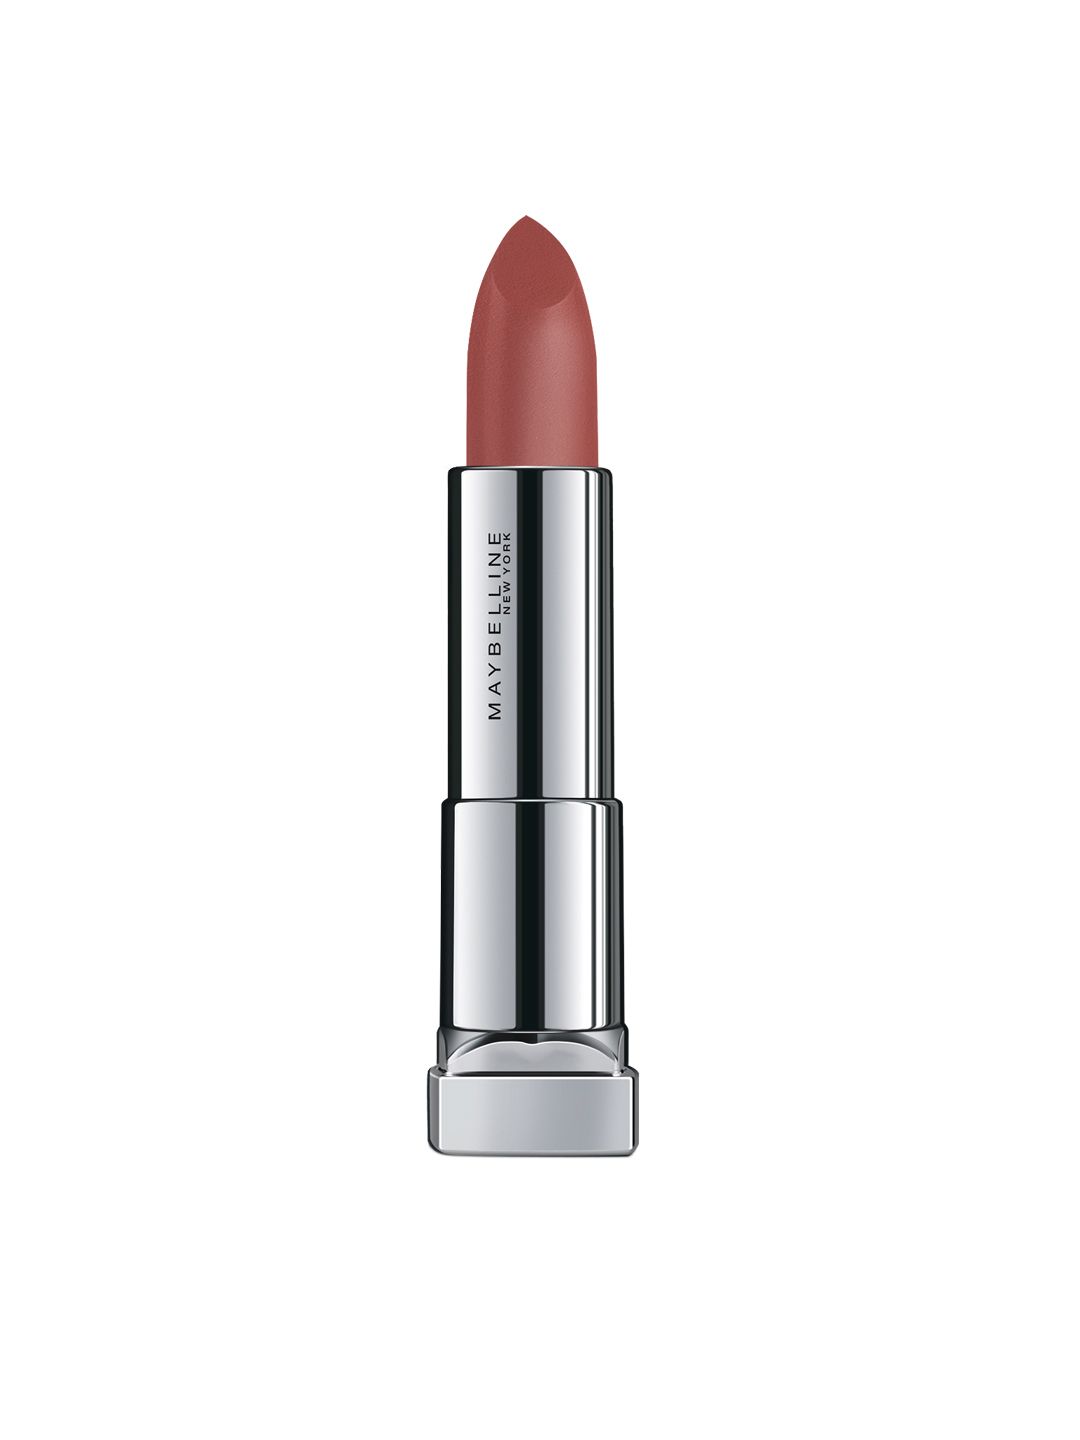 Maybelline New York Color Sensational Powder Matte Lipstick - Toasted Brown Price in India